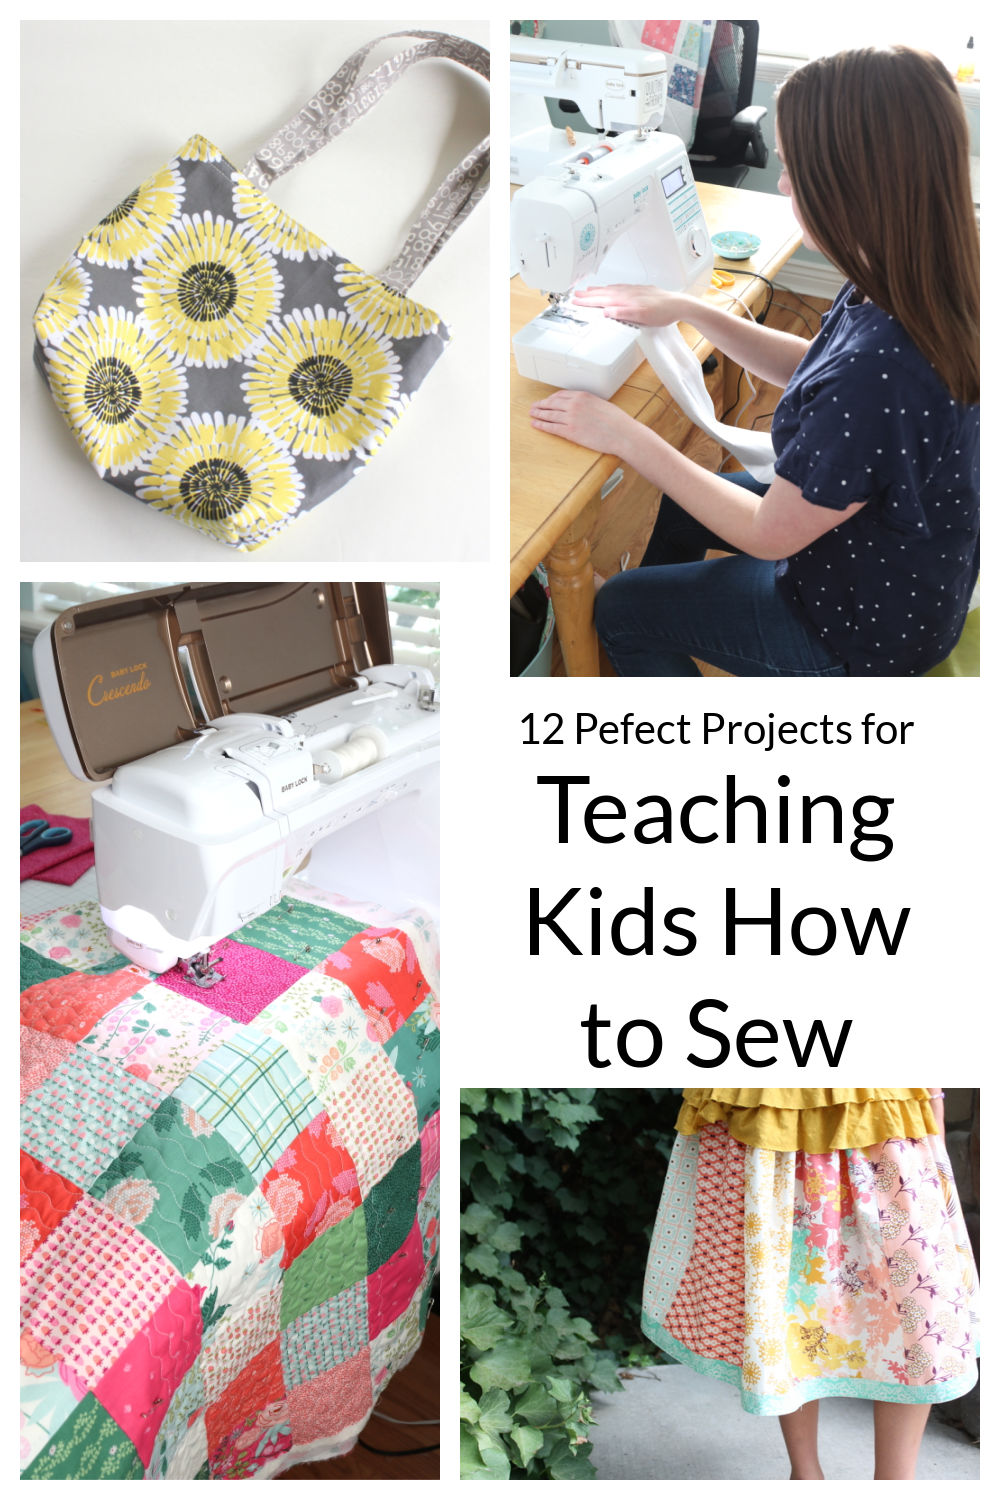 12 Easy Sewing Projects for Kids & Beginners - Diary of a Quilter